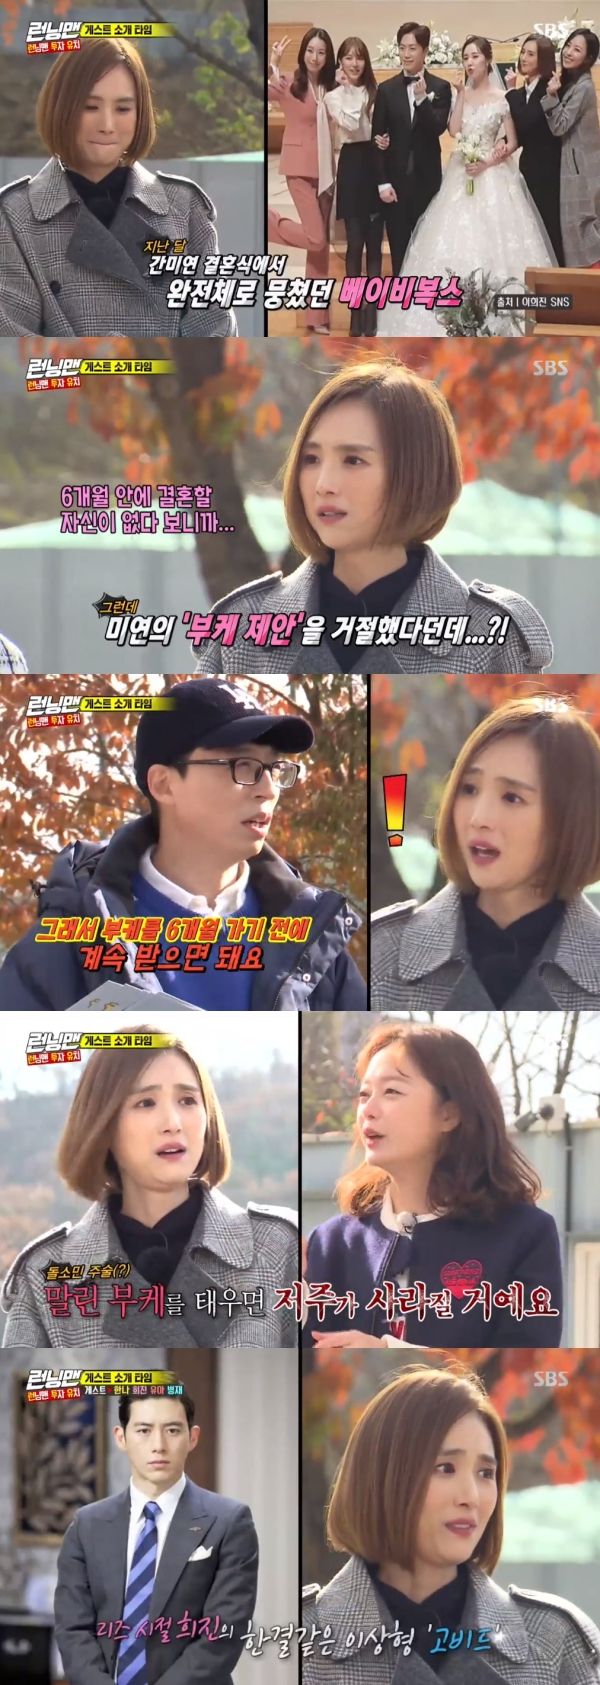 Lee Hee-Jin has unveiled the ideal type.On SBS Running Man broadcasted on the 8th, Baby V.O.X Lee Hee-Jin appeared as a guest and revealed the ideal type.On the show, Lee Hee-Jin said, Hello, its Lee Hee-Jin. The members welcomed Lee Hee-Jins appearance, saying, Baby V.O.X.Lee Hee-Jin, who recently visited Kan Mi-yeons wedding, said he did not receive a bouquet and said, I am not confident to marry in six months.I get a bouquet and get it again in six months, said Yoo Jae-Suk, who said, It will be renewed. Then, Jeon So-min laughed, saying, You can dry the bouquet and burn it.Lee Hee-Jin also revealed about ideal type.Lee Hee-Jin said, Mr. Kosu about the ideal type in the past, but now he said, I do not want to cheat, work hard, and do not interfere when I work.Haha said, There is pain even if I look at it. Yoo Jae-Suk asked, Who is my ex-boyfriend?On the other hand, Lee Hee-Jin showed dance to Baby V.O.X song with infant who appeared as guest together.